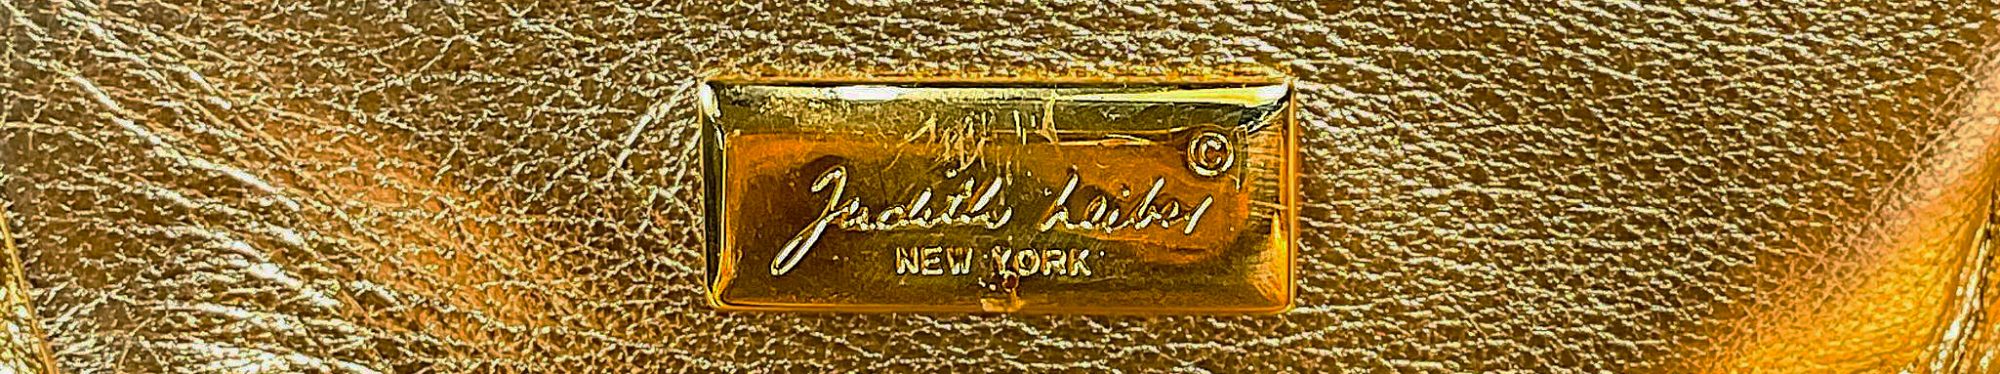 judith-leiber-collecting